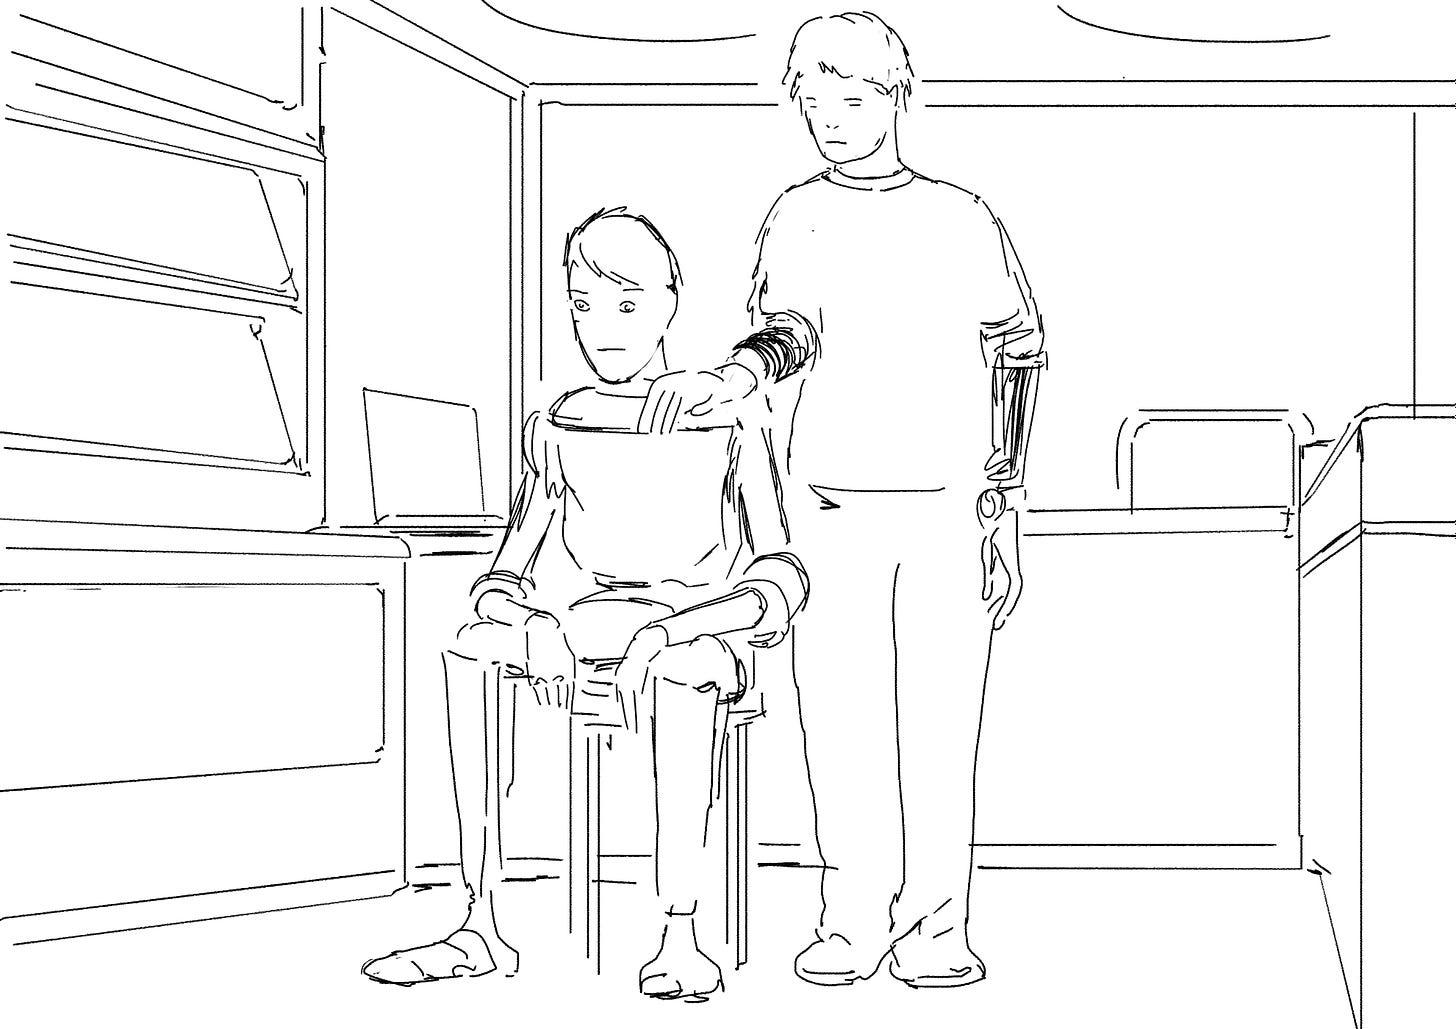 A linework sketch of a robot character sat down looking sad, with another person behind them.